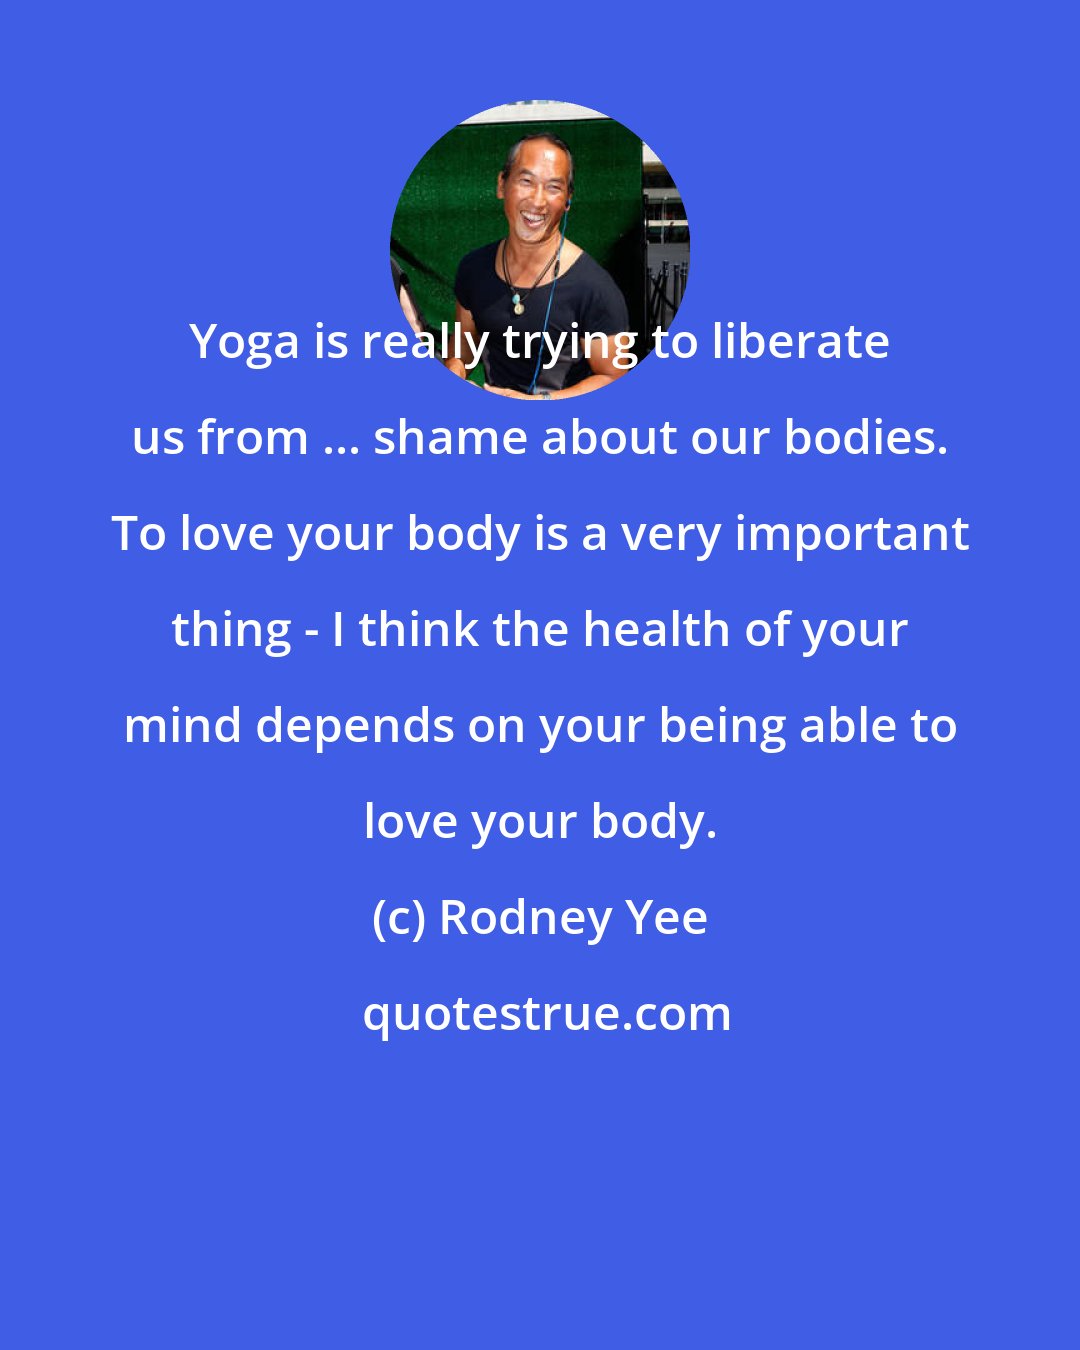 Rodney Yee: Yoga is really trying to liberate us from ... shame about our bodies. To love your body is a very important thing - I think the health of your mind depends on your being able to love your body.